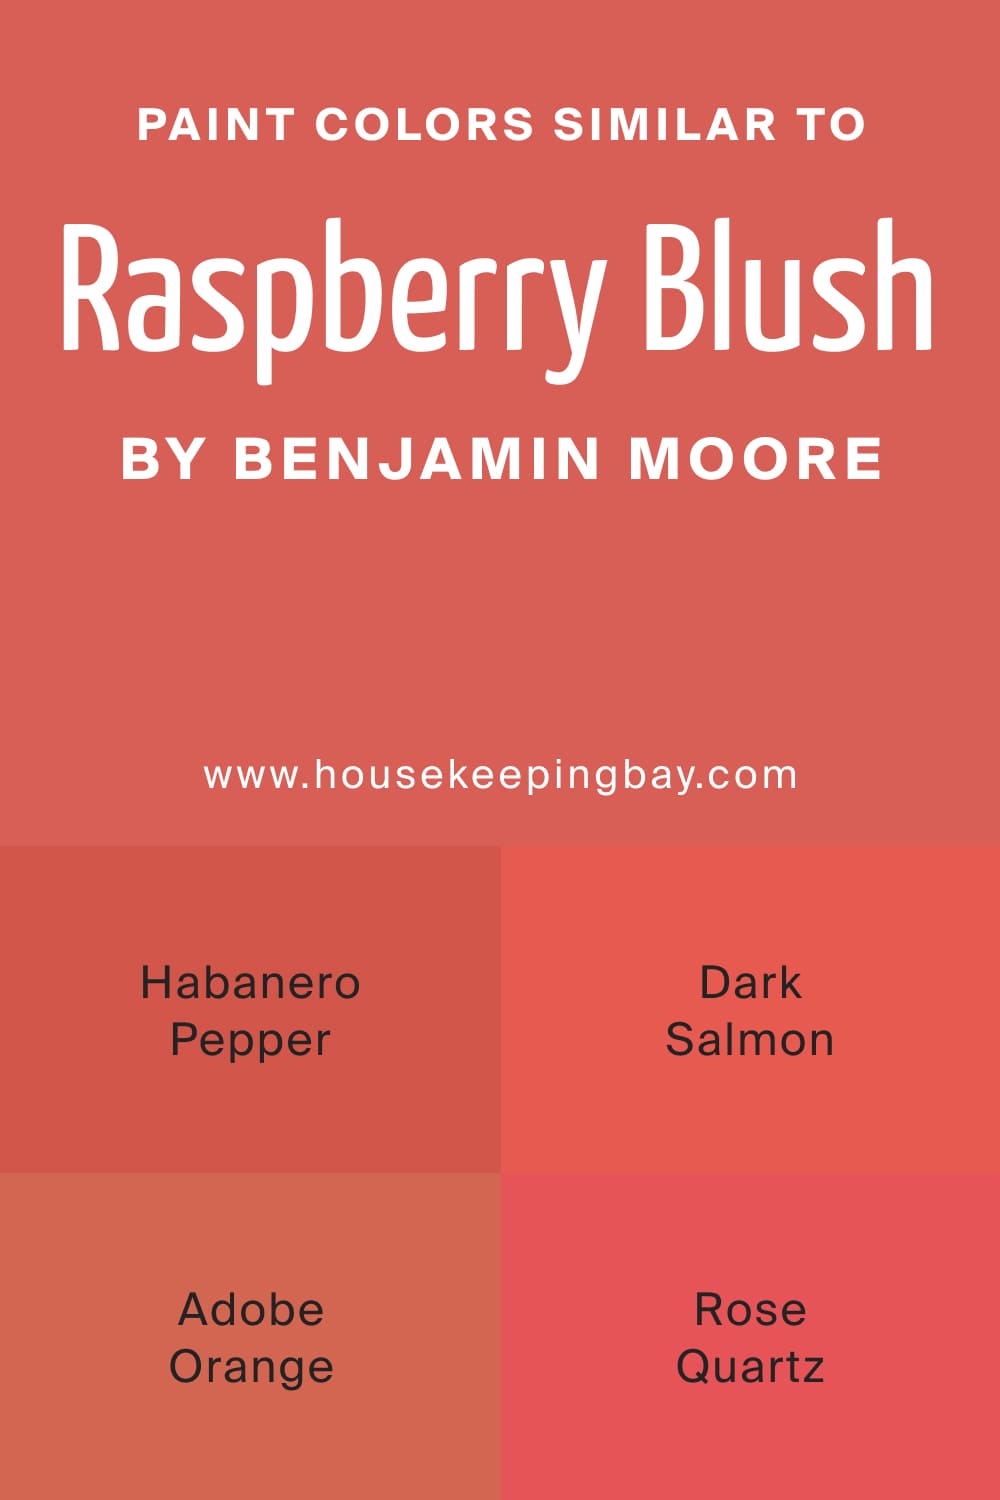 Paint Colors Similar to Raspberry Blush 2008 30 by Benjamin Moore